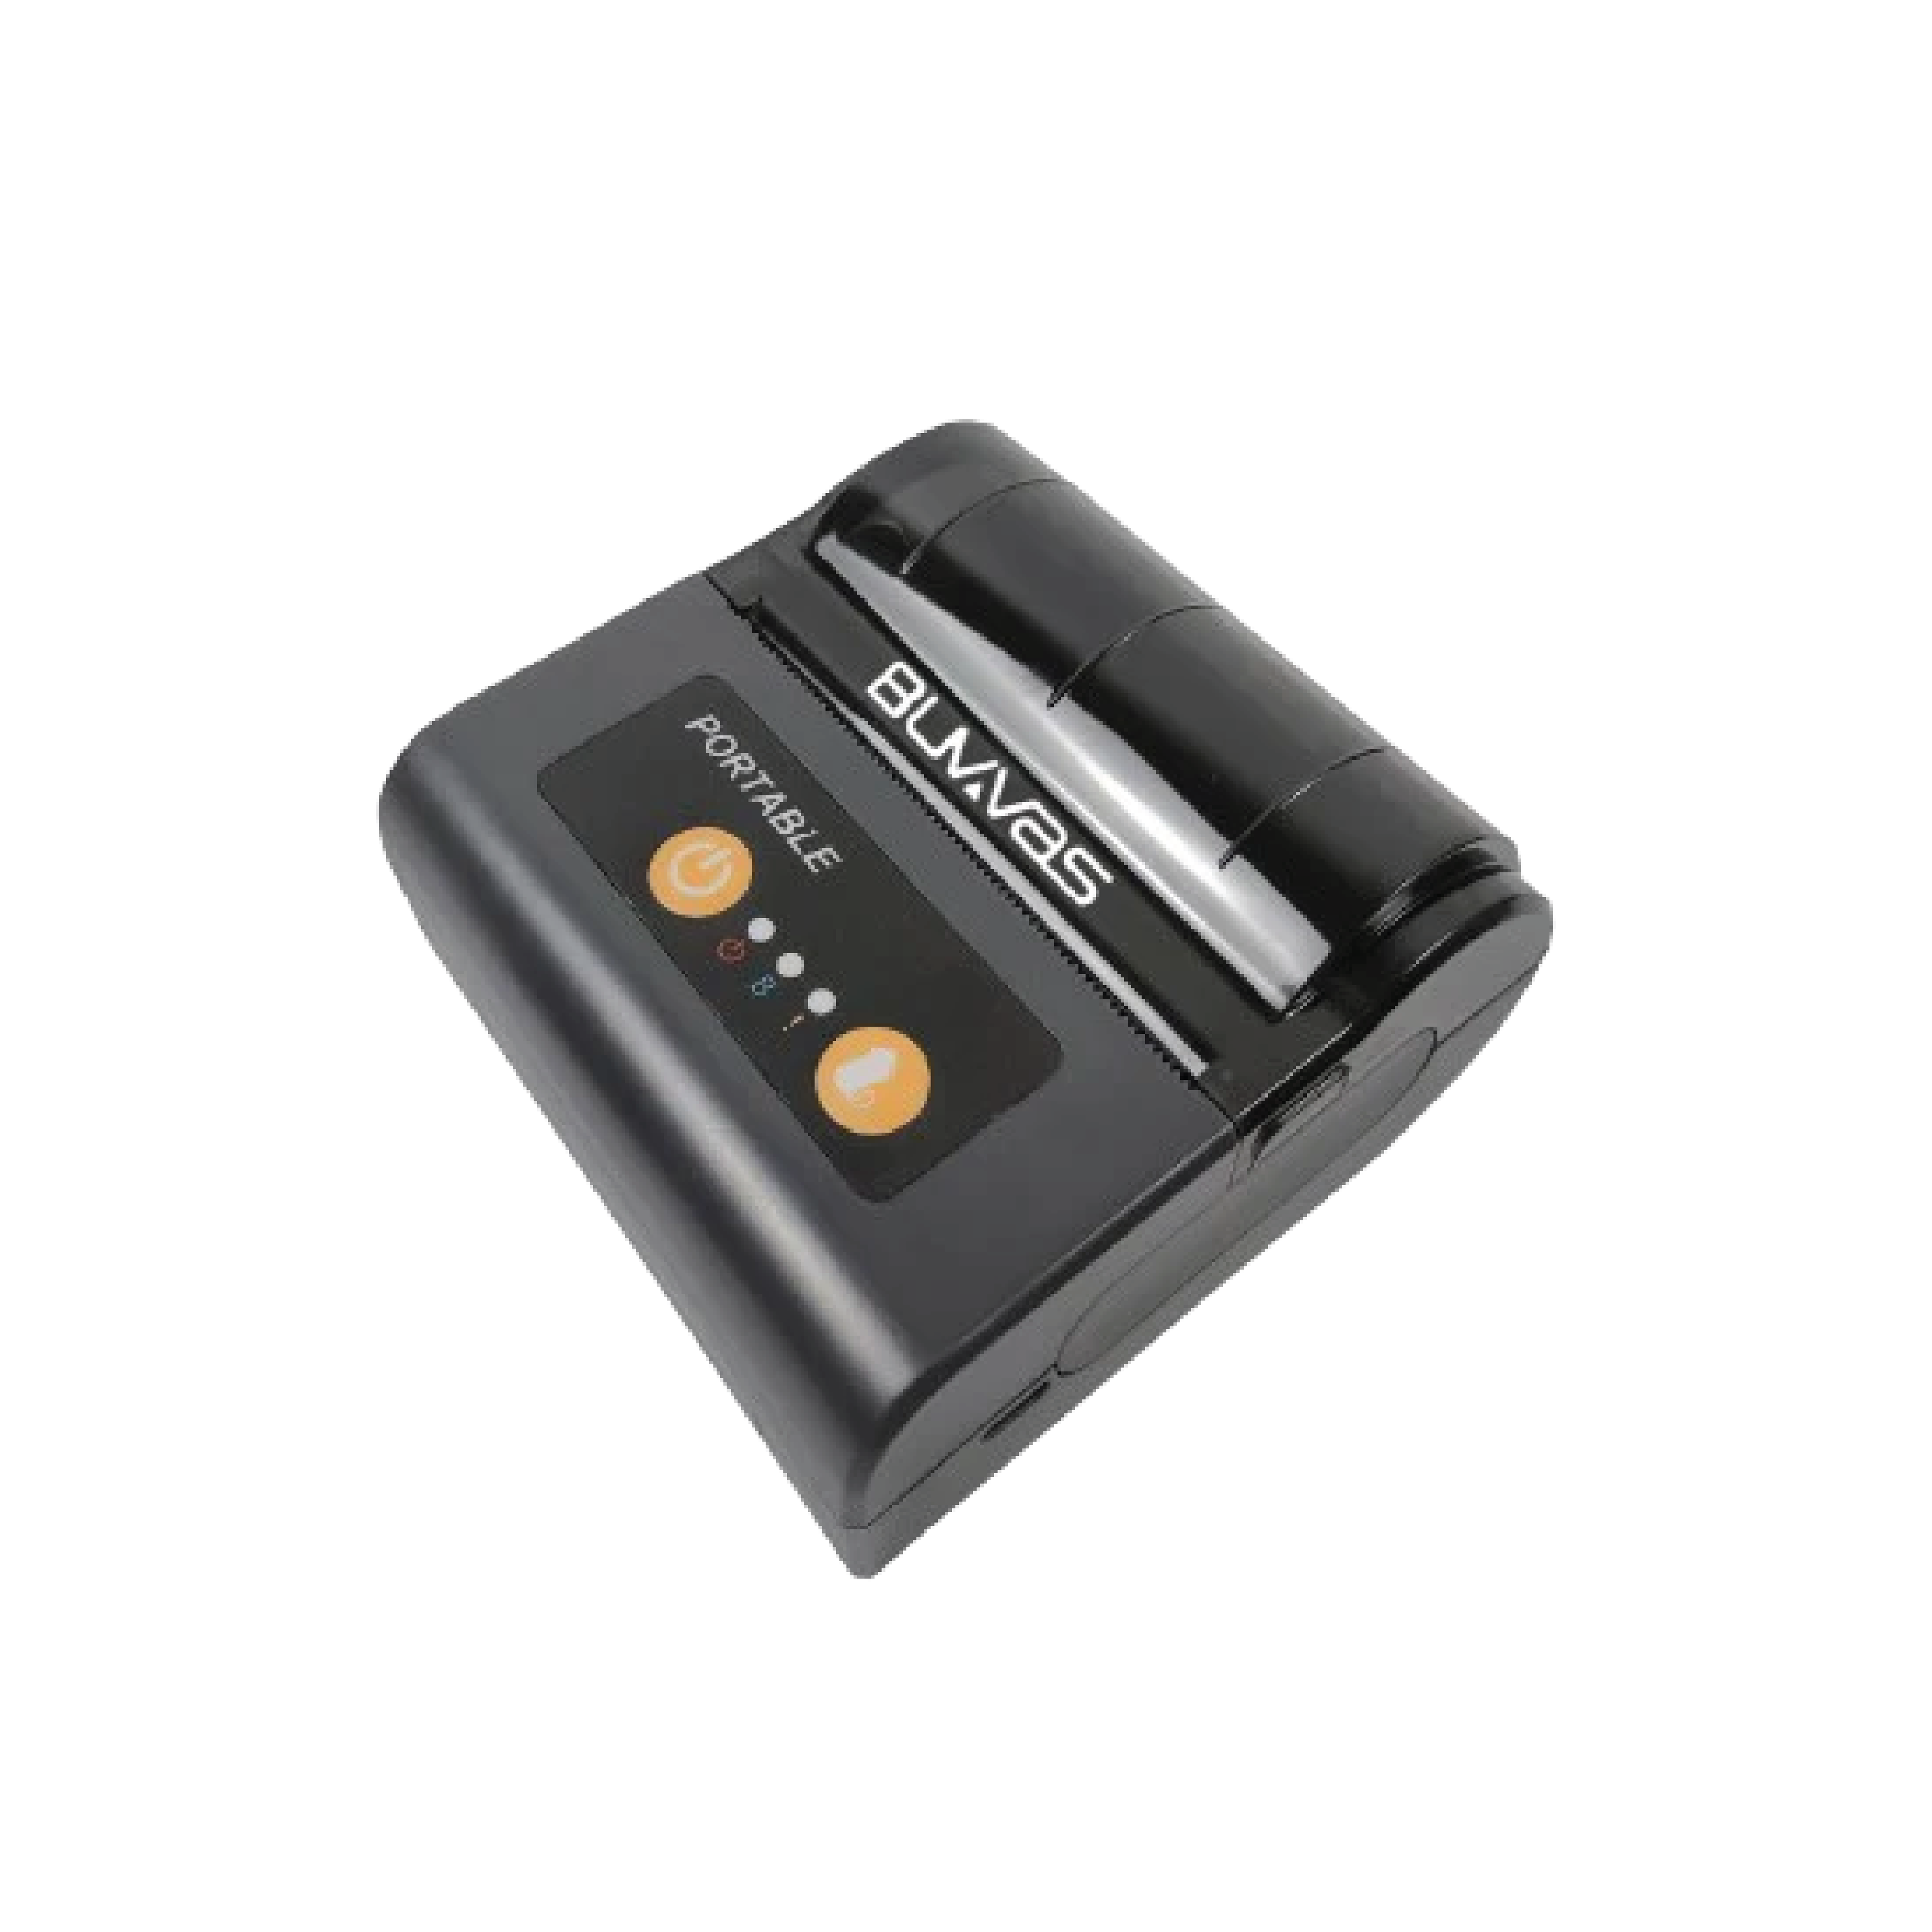 Buvvas HS-88AI Thermal Receipt Printer Regular priceRs. 7,999.00 Sale priceRs. 5,500.00Sale Tax included. Key Specifications Interface: USB+Bluetooth Print Size: 80mm(3 Inch) Printer Speed: 80mm/sec Printer Head Life : 30KM Manual Cut  Battery Capacity: 1500mAh Interface USB + BLUETOOTH